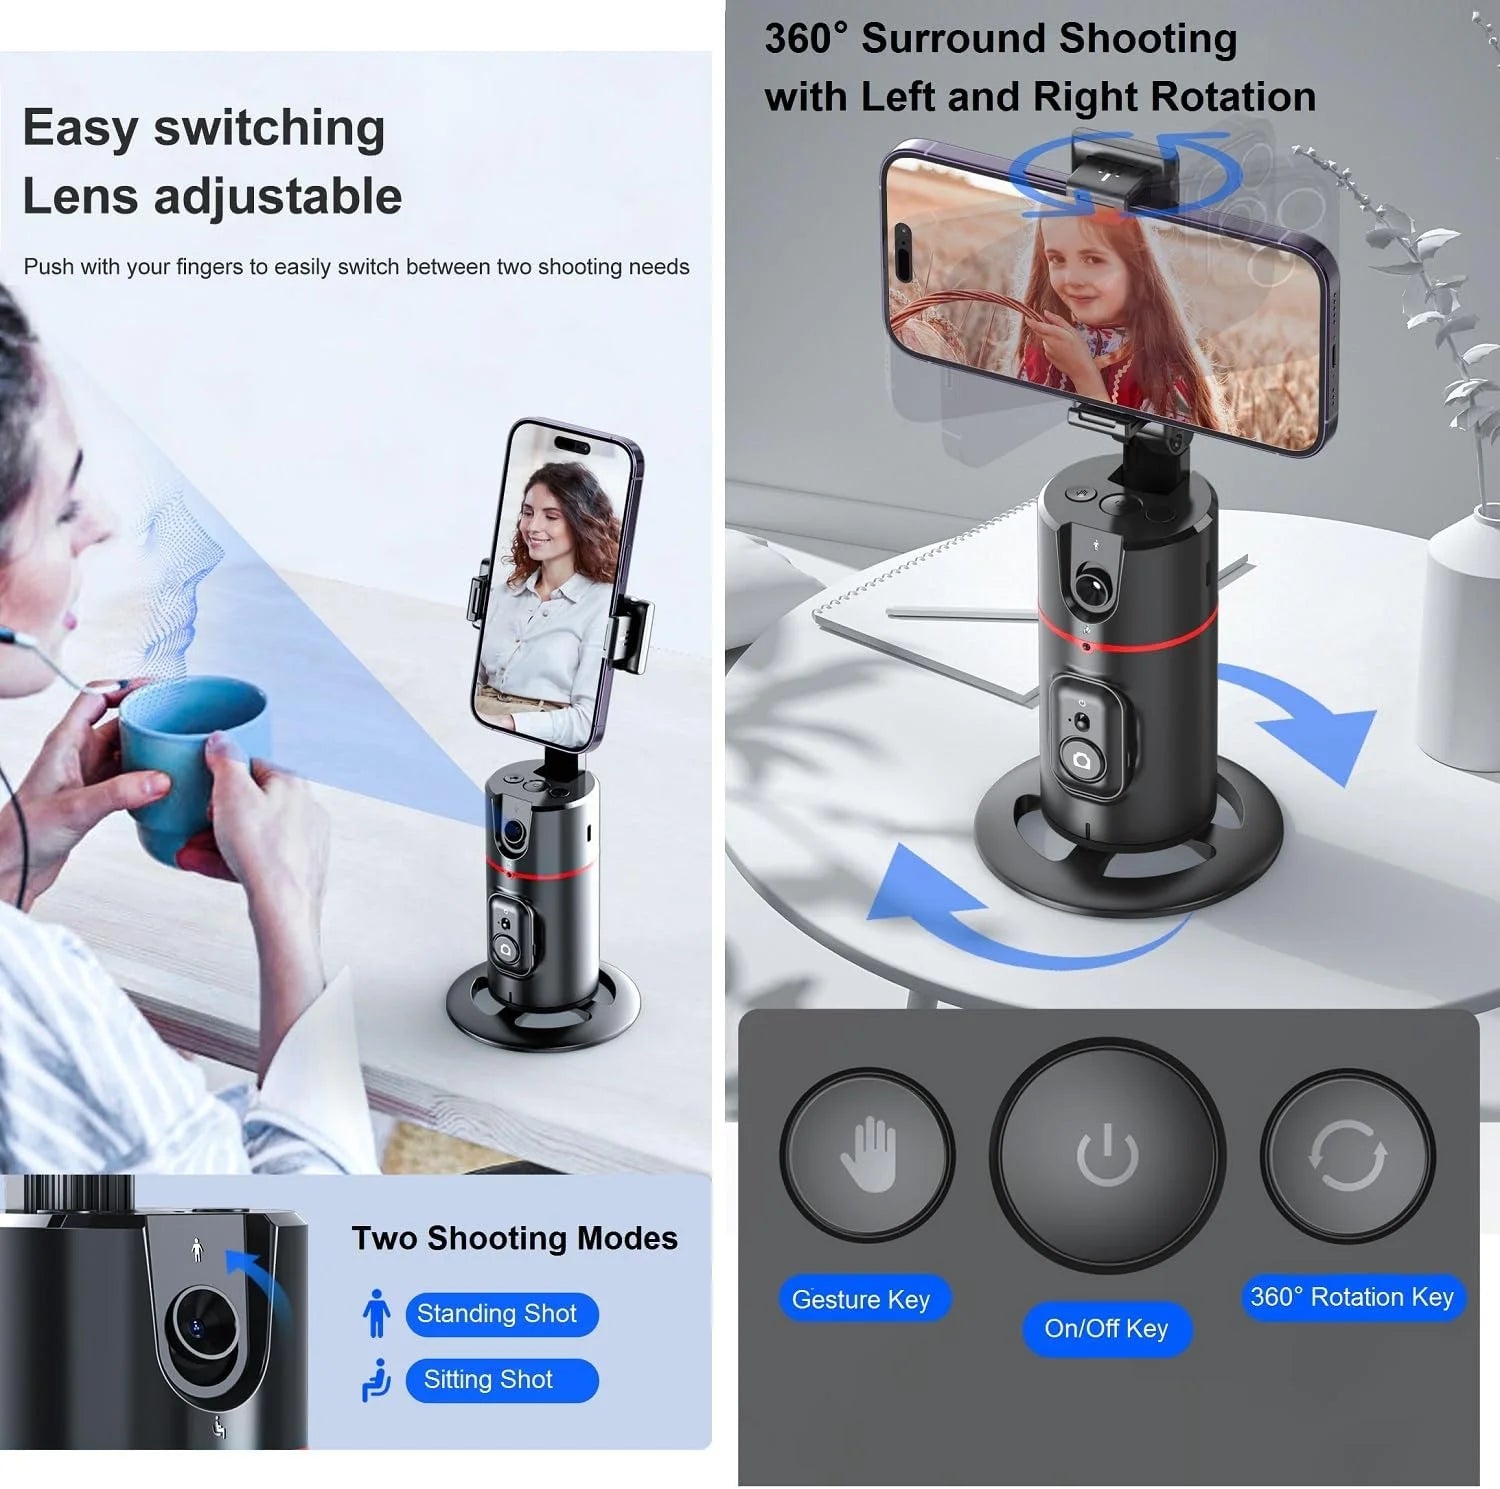 Auto Face Tracking Phone Holder Tripod, No App Required, 360° Rotation Smart Face Body Tracking Tripod Selfie Phone Camera Mount Cell Phone Stand for TIK Tok, Vlog, Live Streaming, Youtube Video